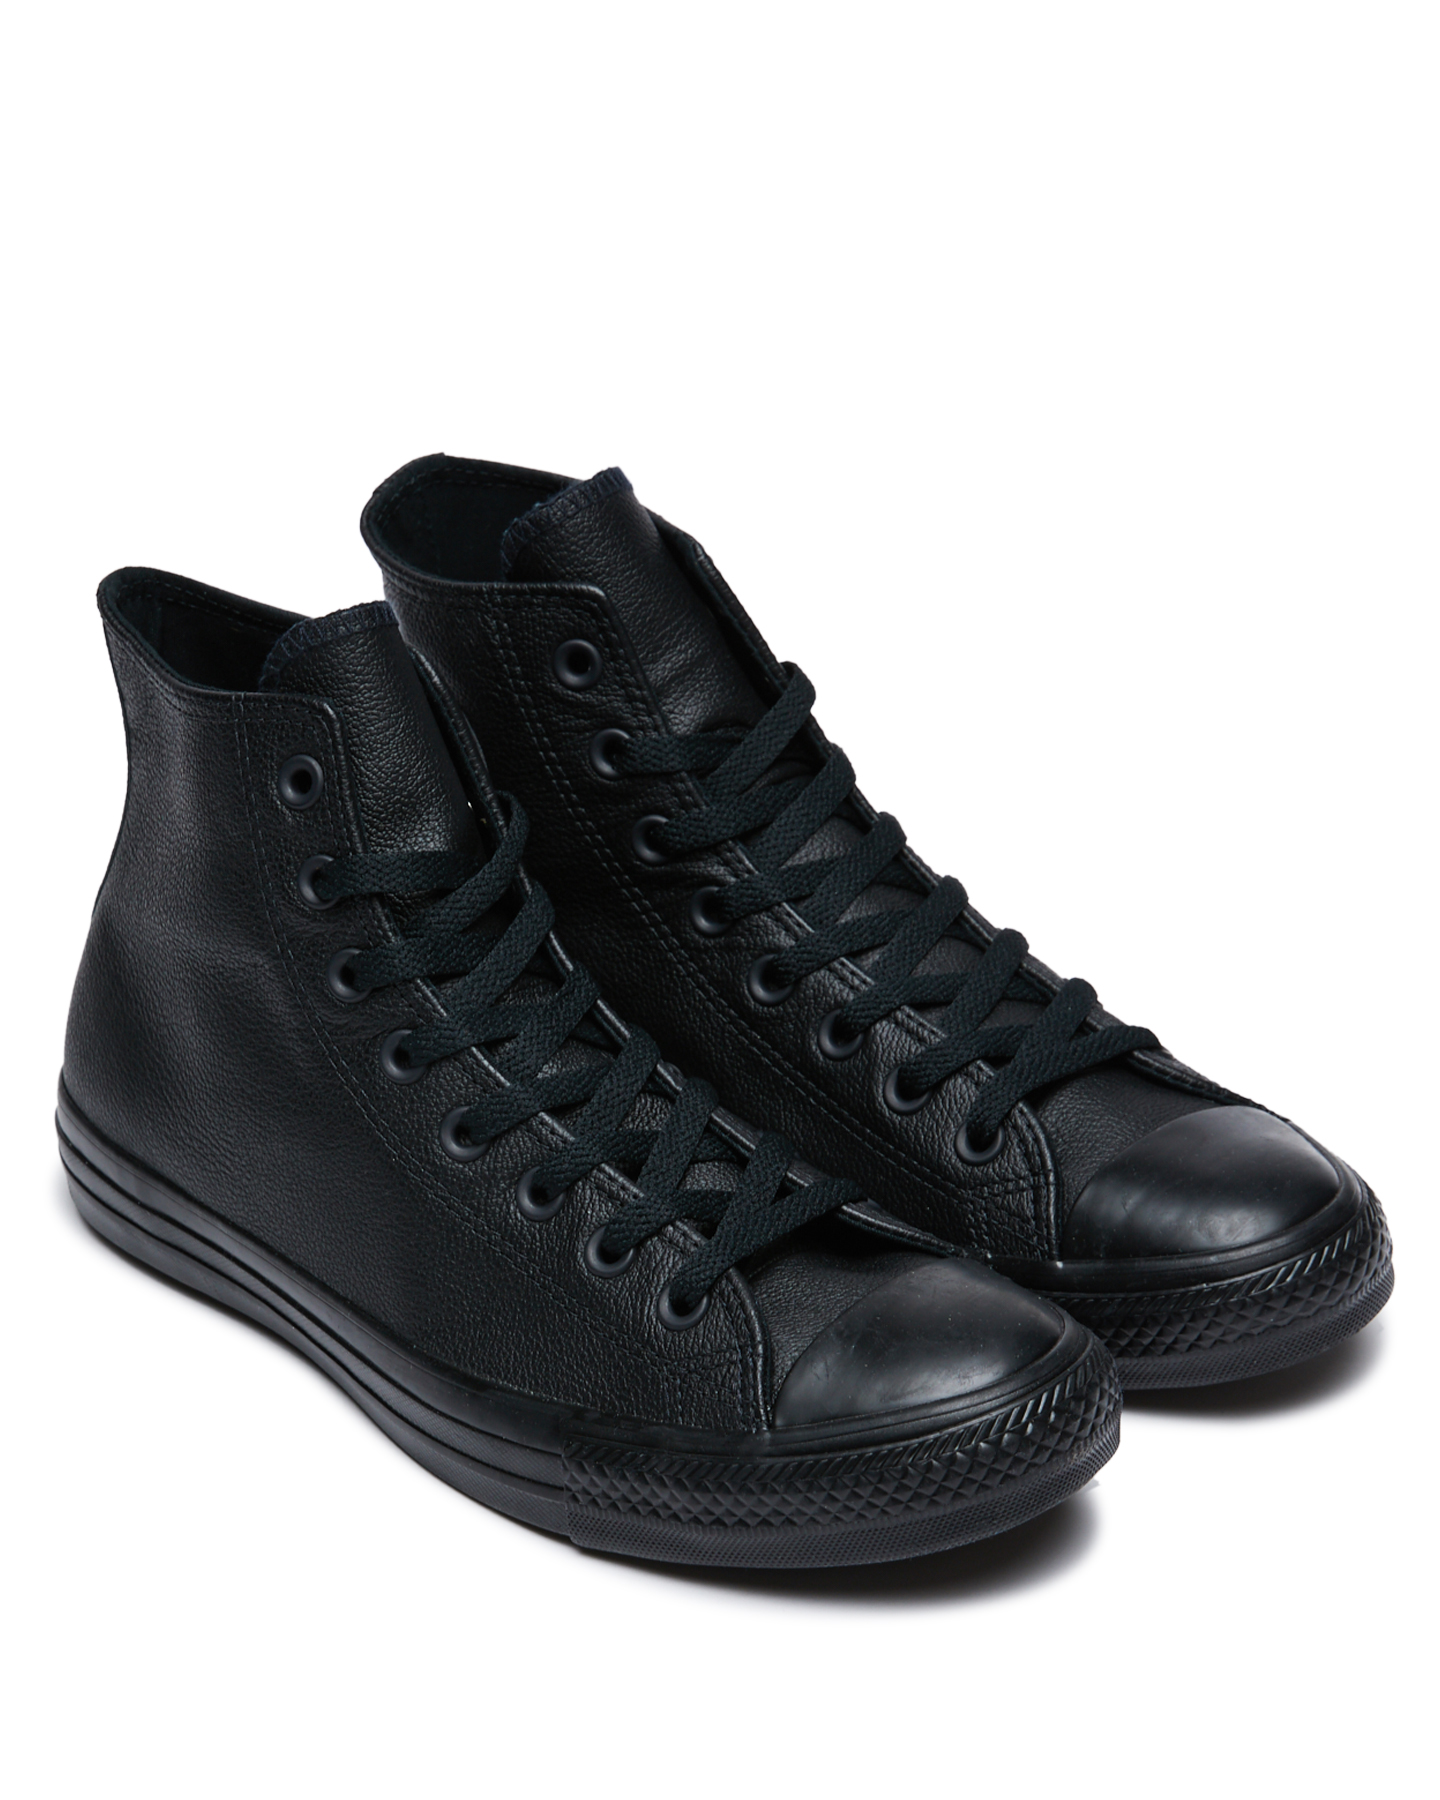 Converse Womens Chuck Taylor All Star Hi Top Leather Shoe - Black ...